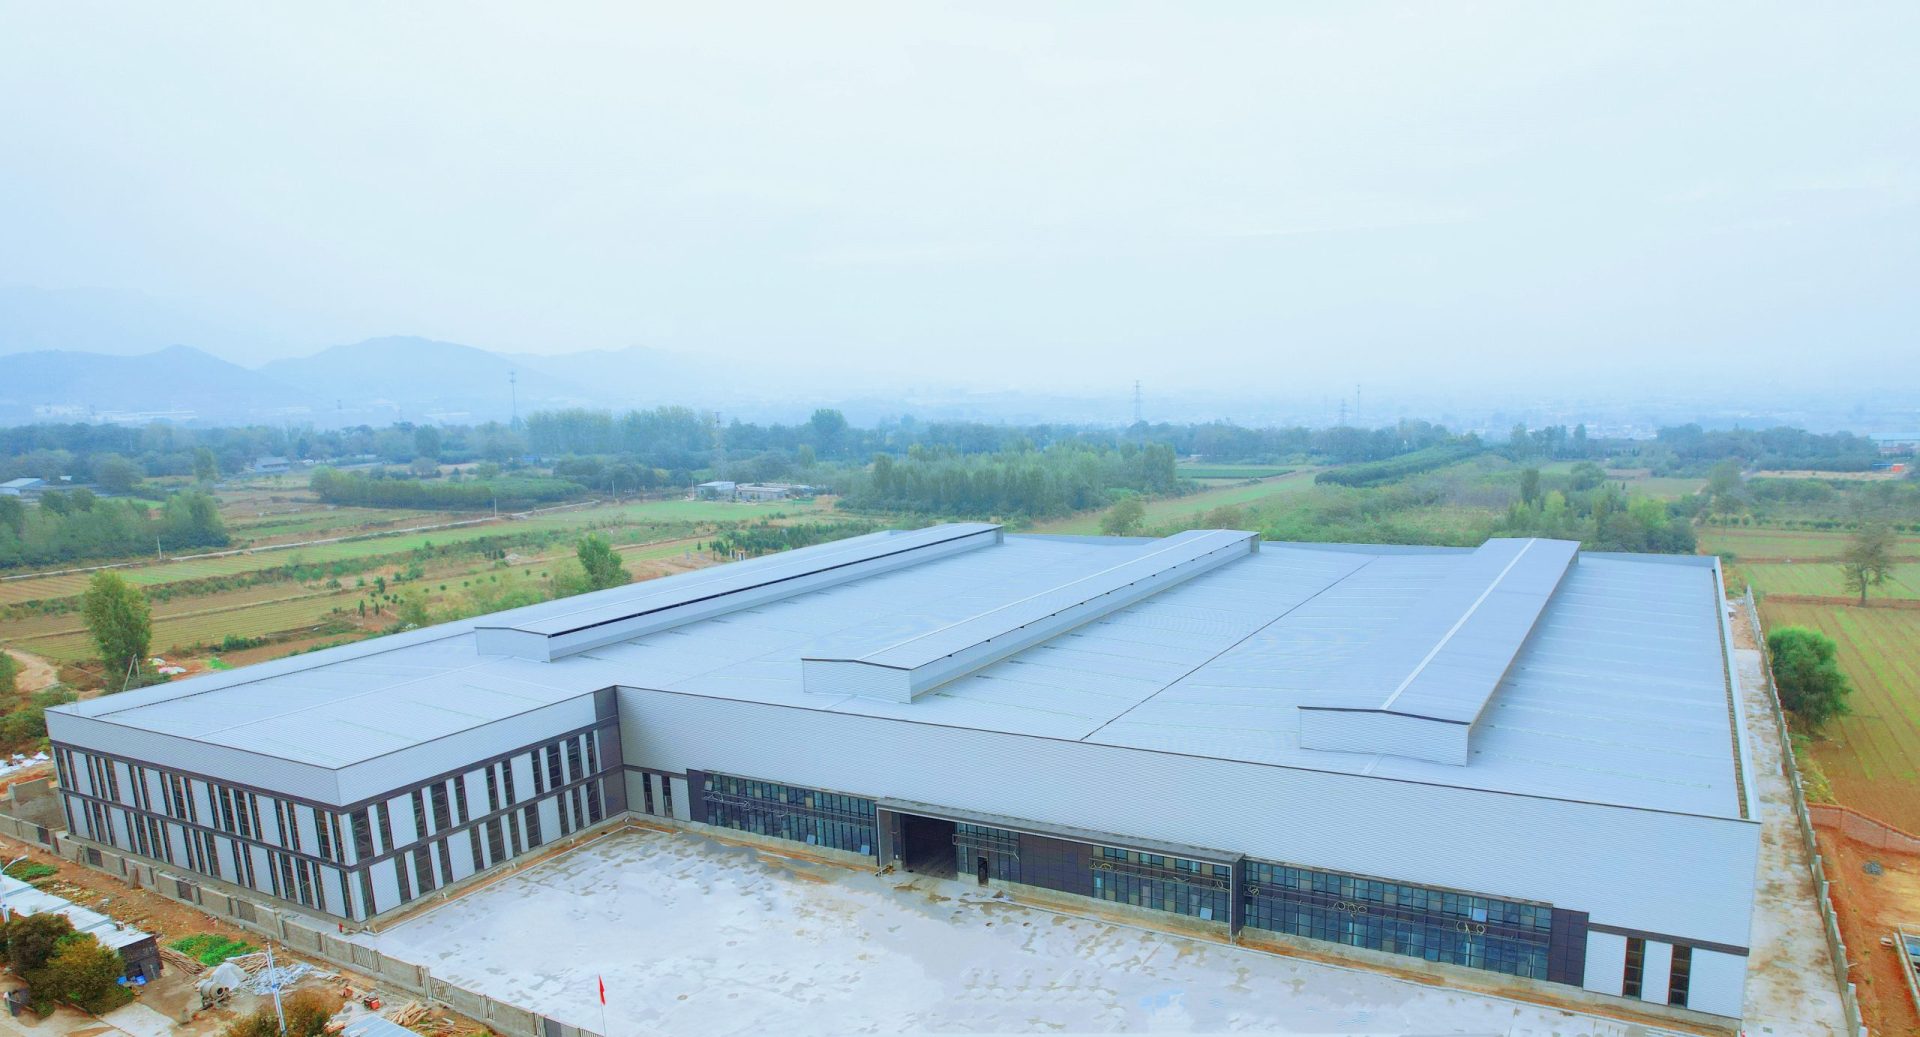 The high-tech industrial park of the Group was completed as scheduled.